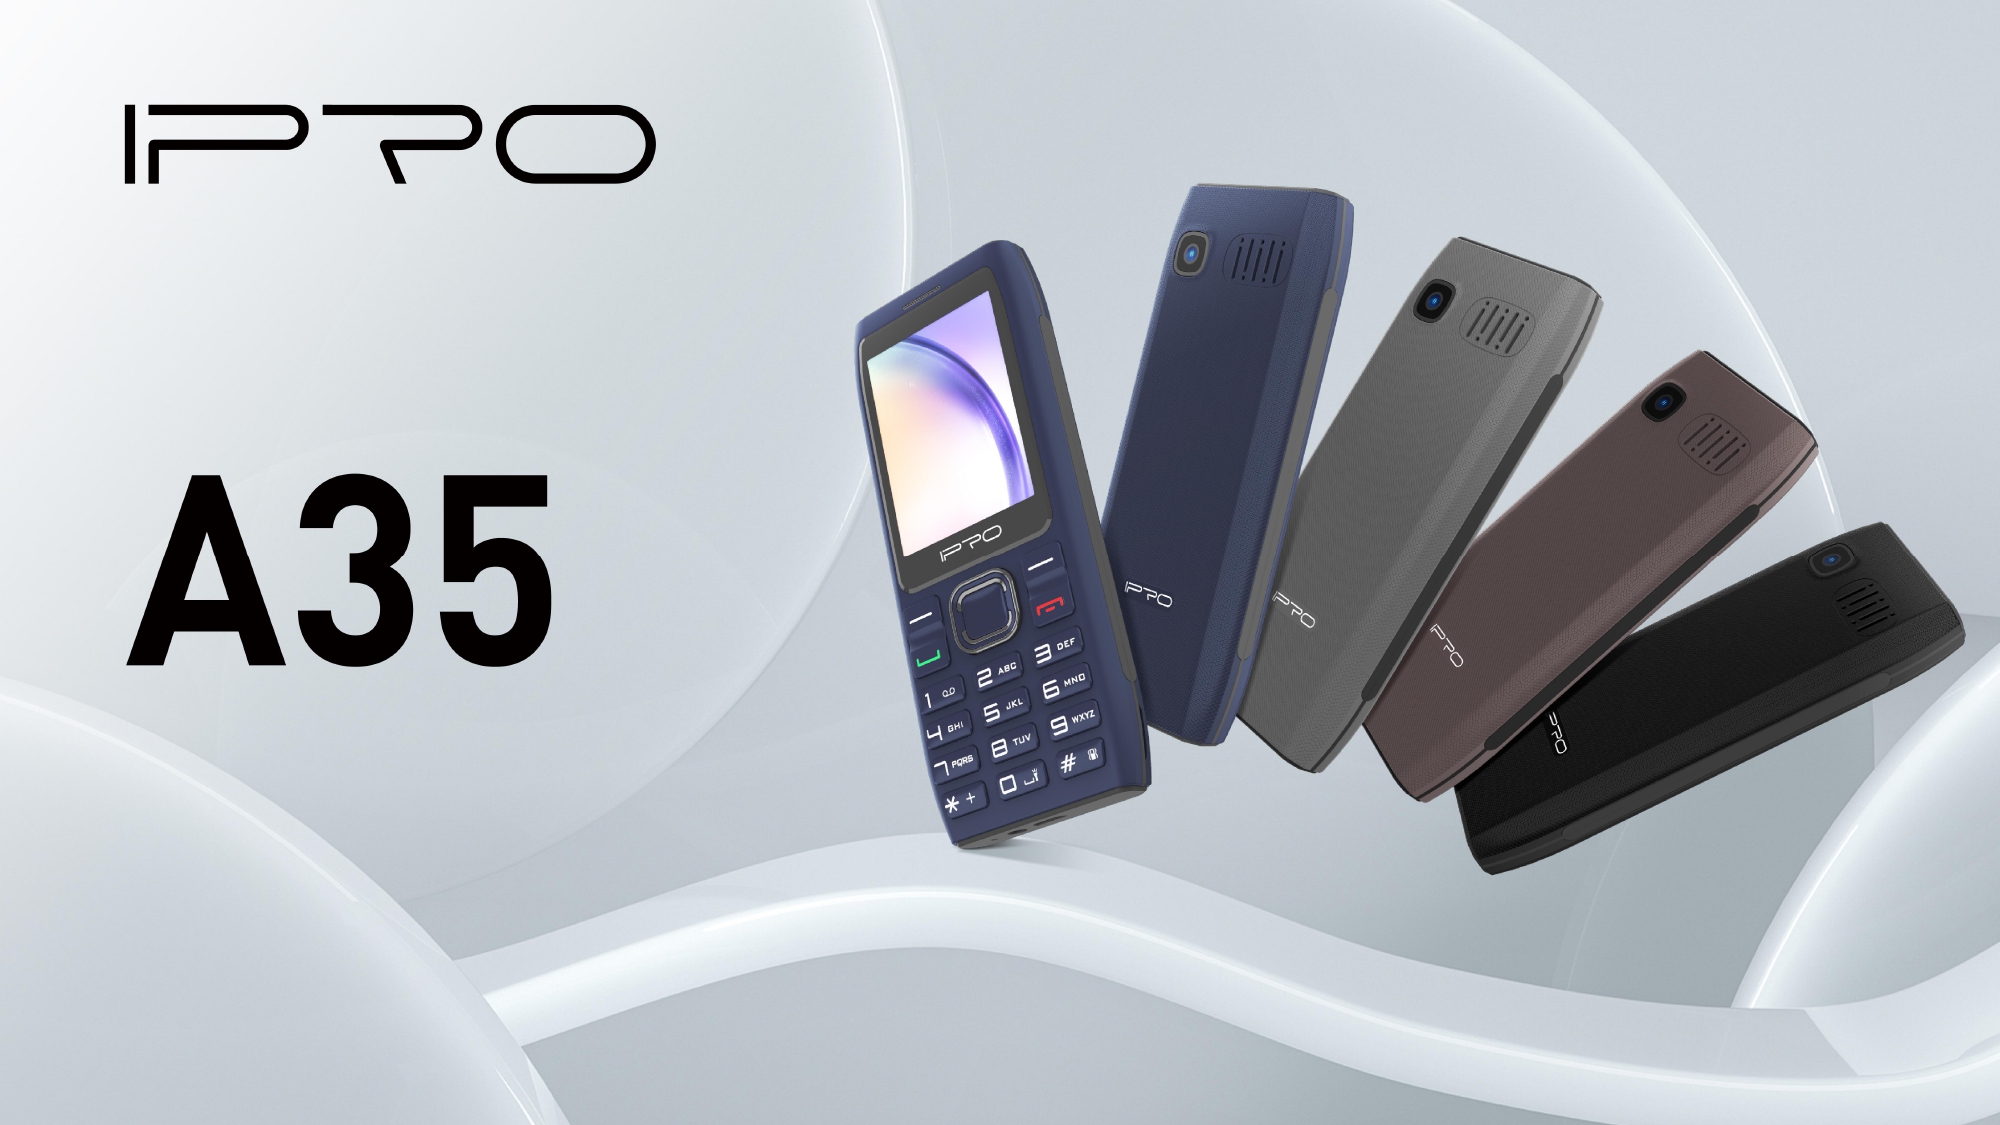 IPRO original A35 4 card feature phone 0.3MP camera 2500mAh large battery 2.4 inch 2G feature phone